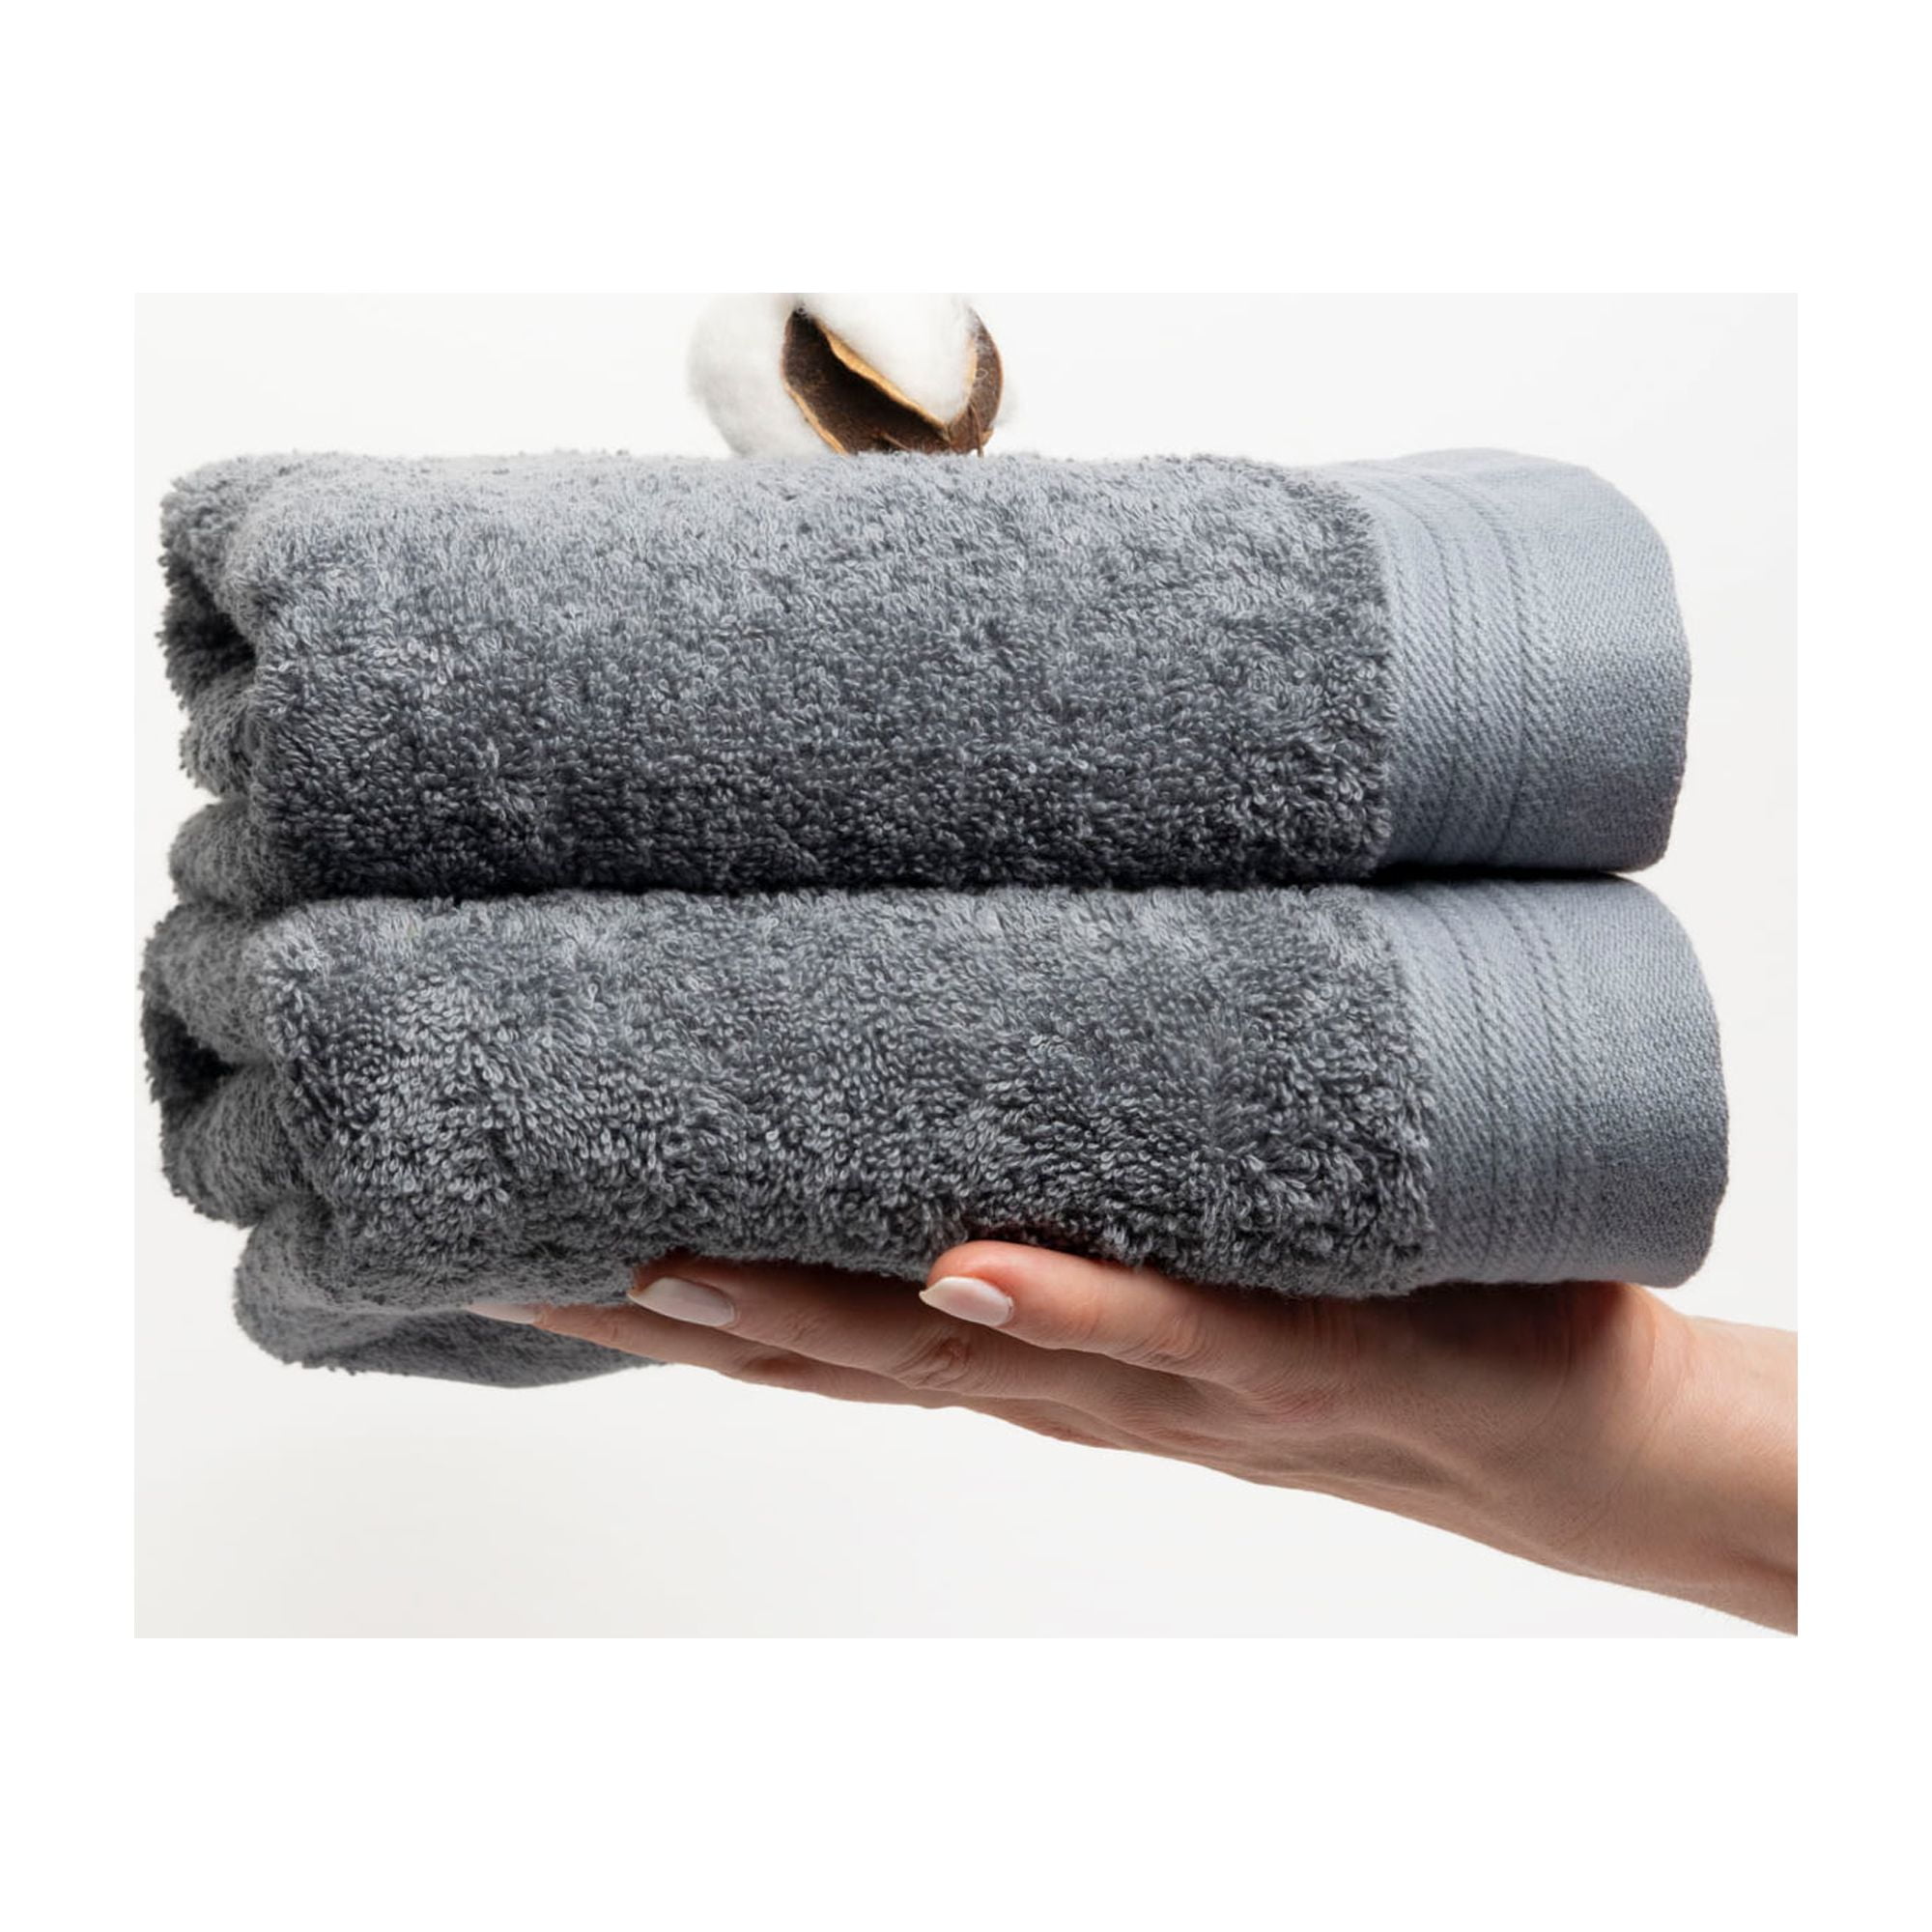 Premium Towel Set of 4 Hand Towels 18 inch x 30 inch Color: Green & Black 100% Cotton |Machine Washable High Absorbency | by Weidemans, Size: 4 Pieces